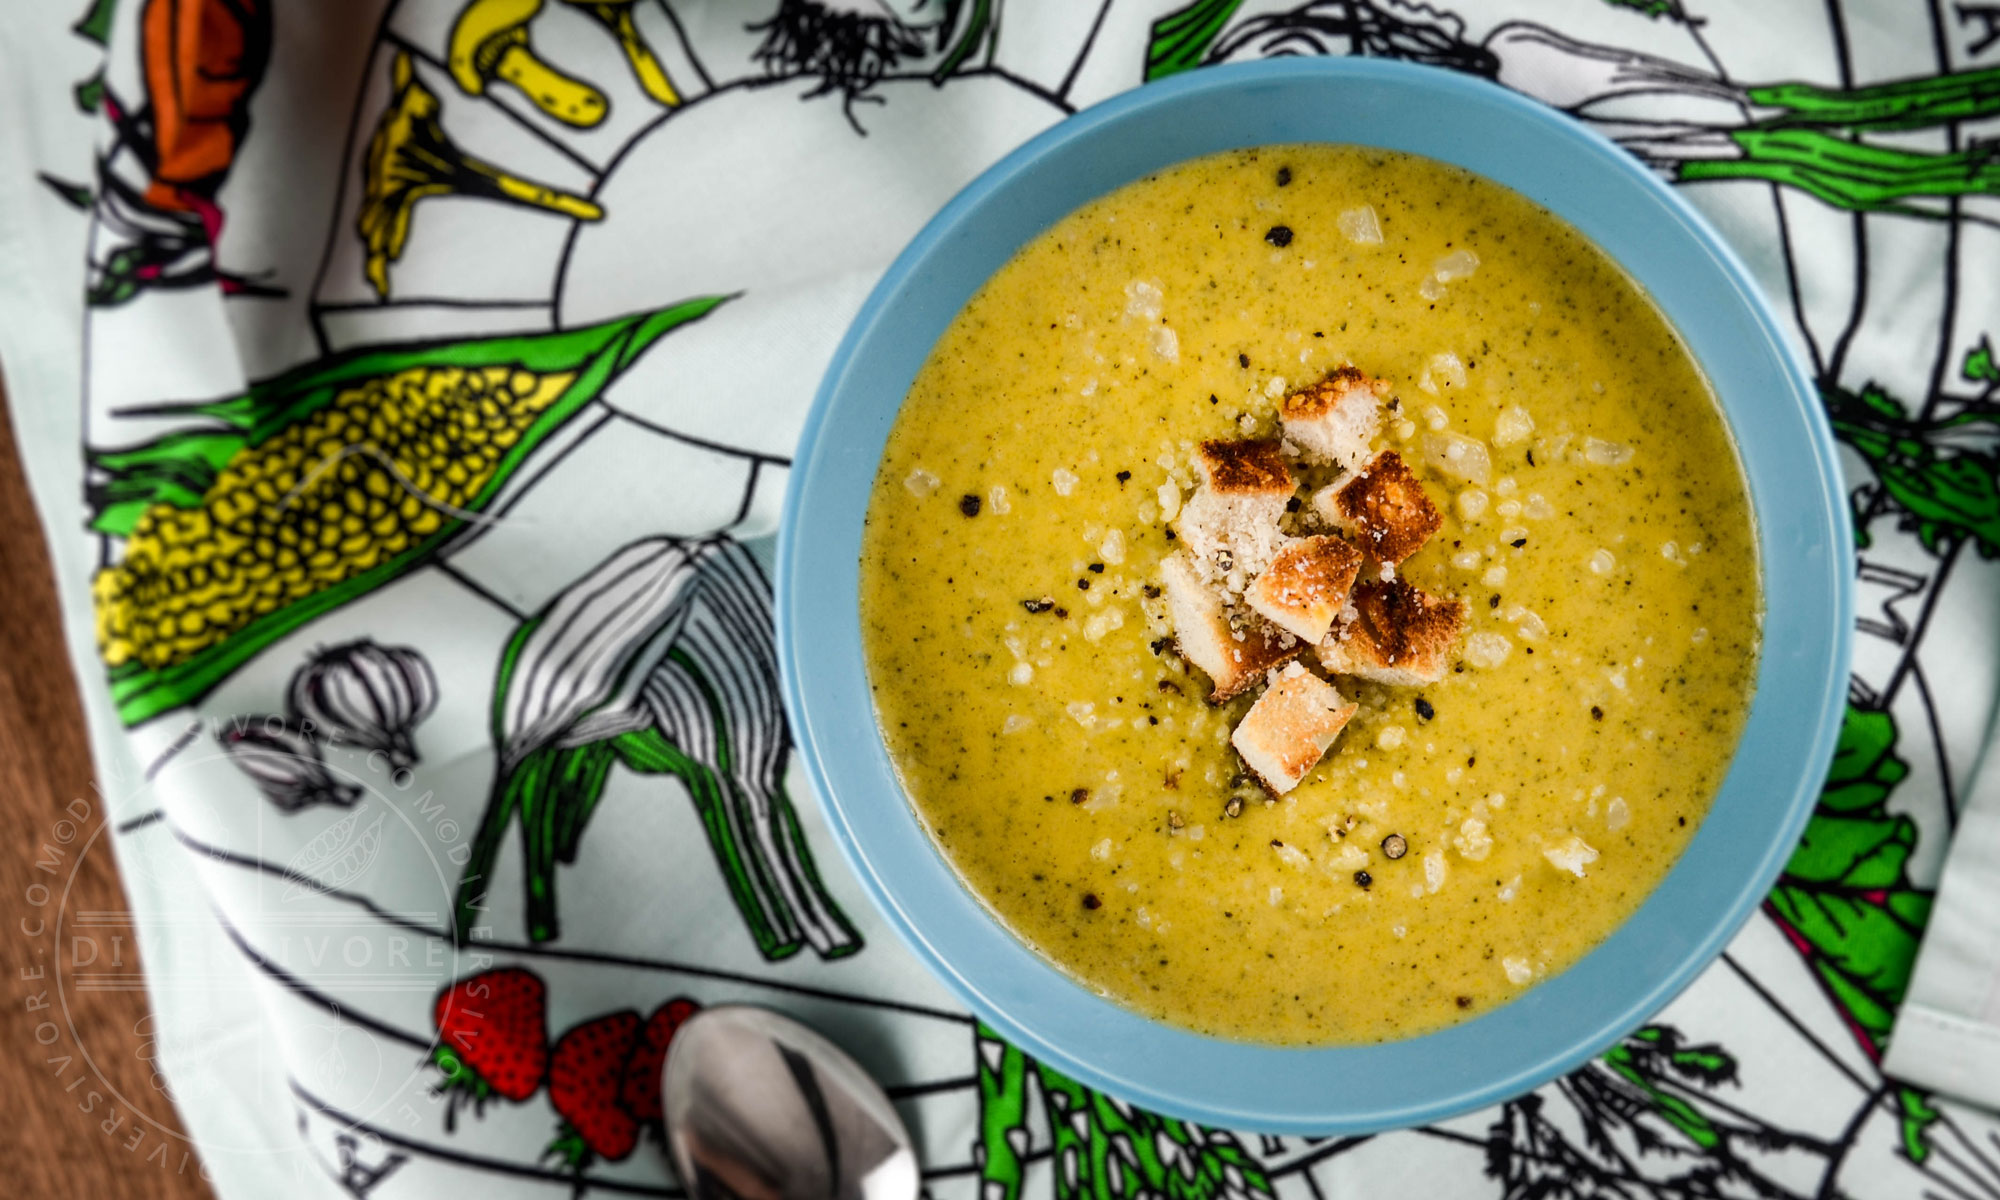 Broccoli Cheddar Soup with less fat than traditional recipes (but all of the taste!) - Diversivore.com